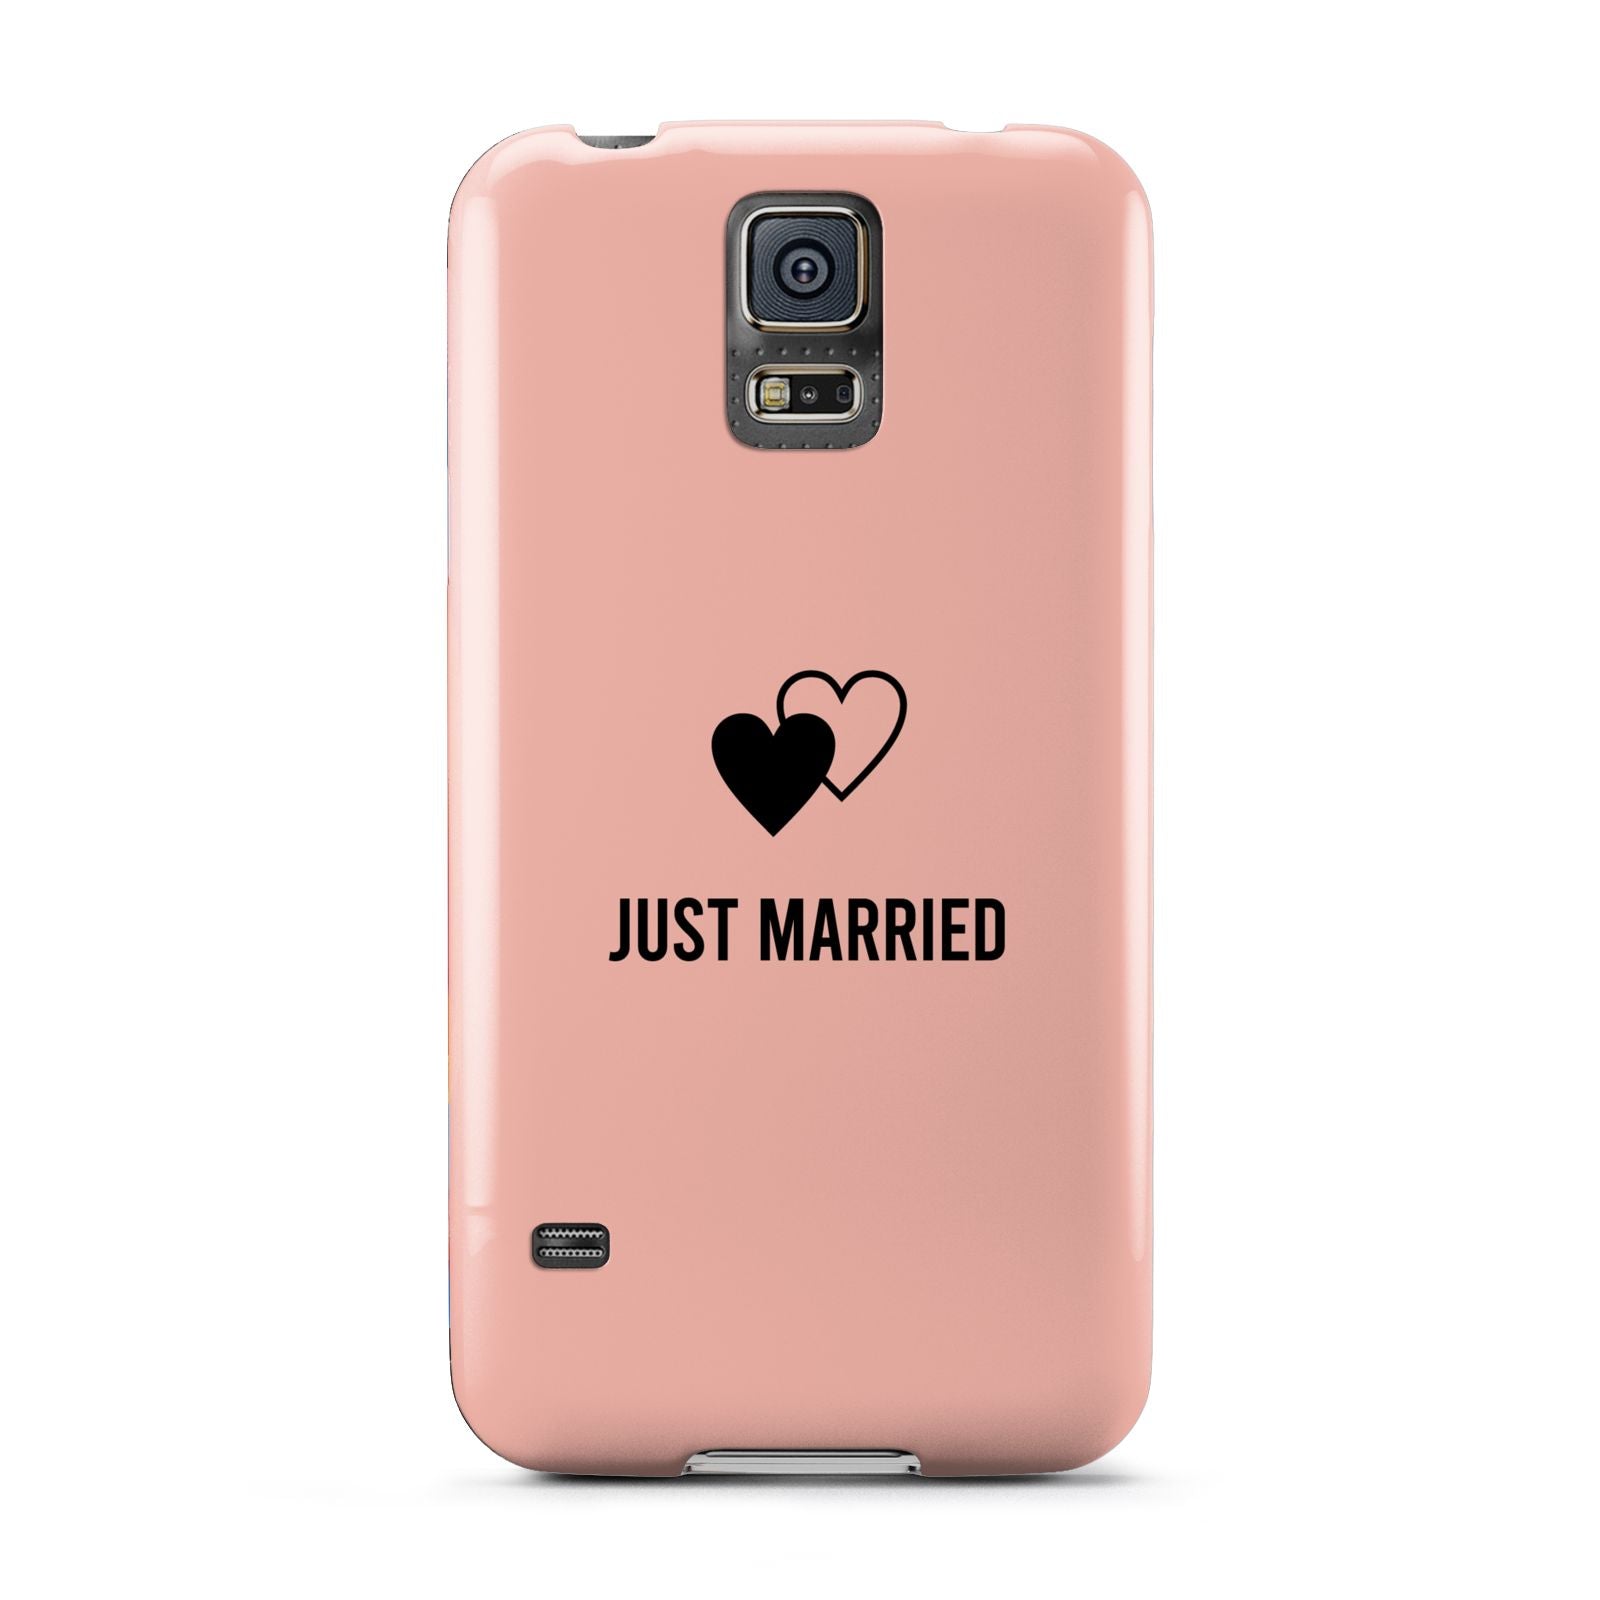 Just Married Samsung Galaxy S5 Case